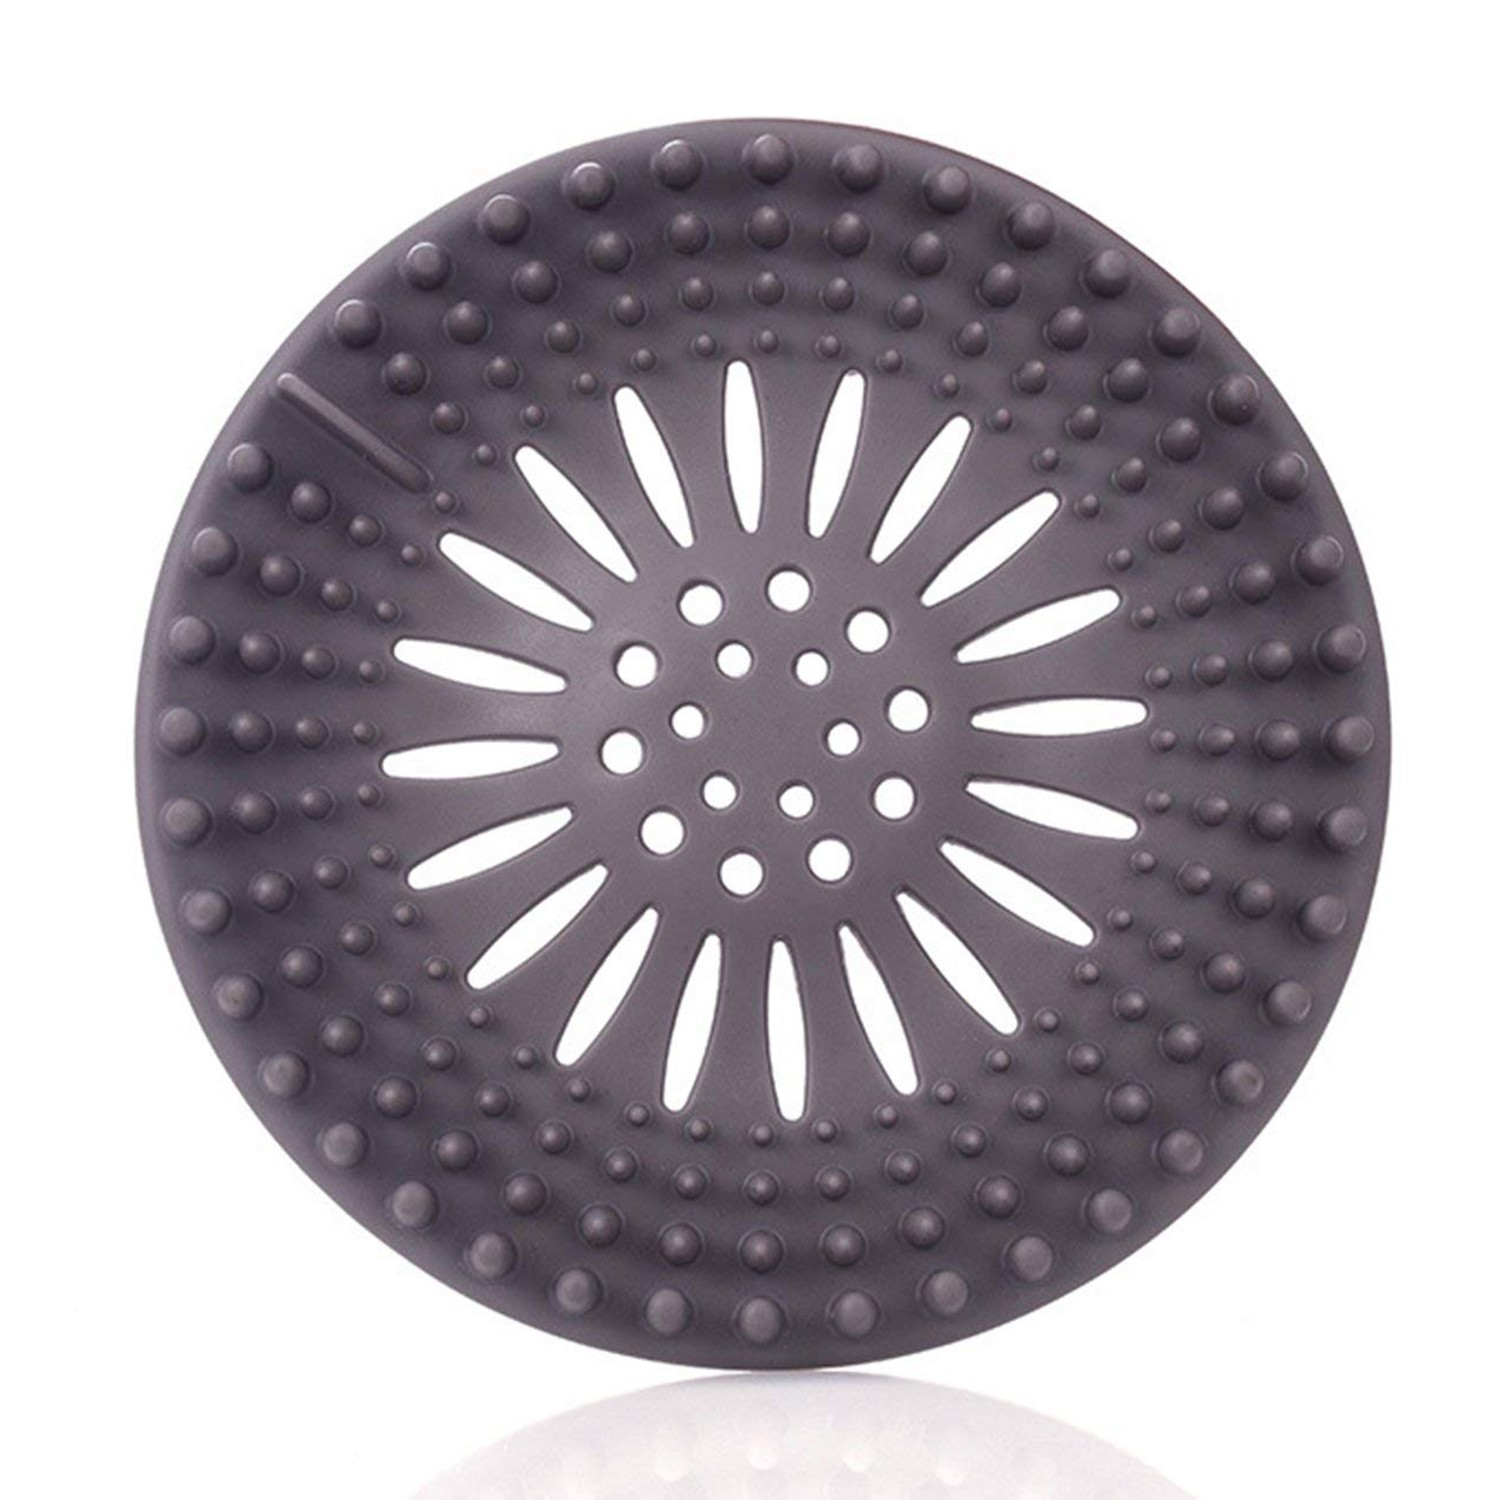 Sale5 Pack Hair Catcher Hair Stopper Shower Drain Covers For Bathroom Bathtub And Kitchen Rubber Sink Strainer Silicone Filter Home Drain Cover Shopee Indonesia